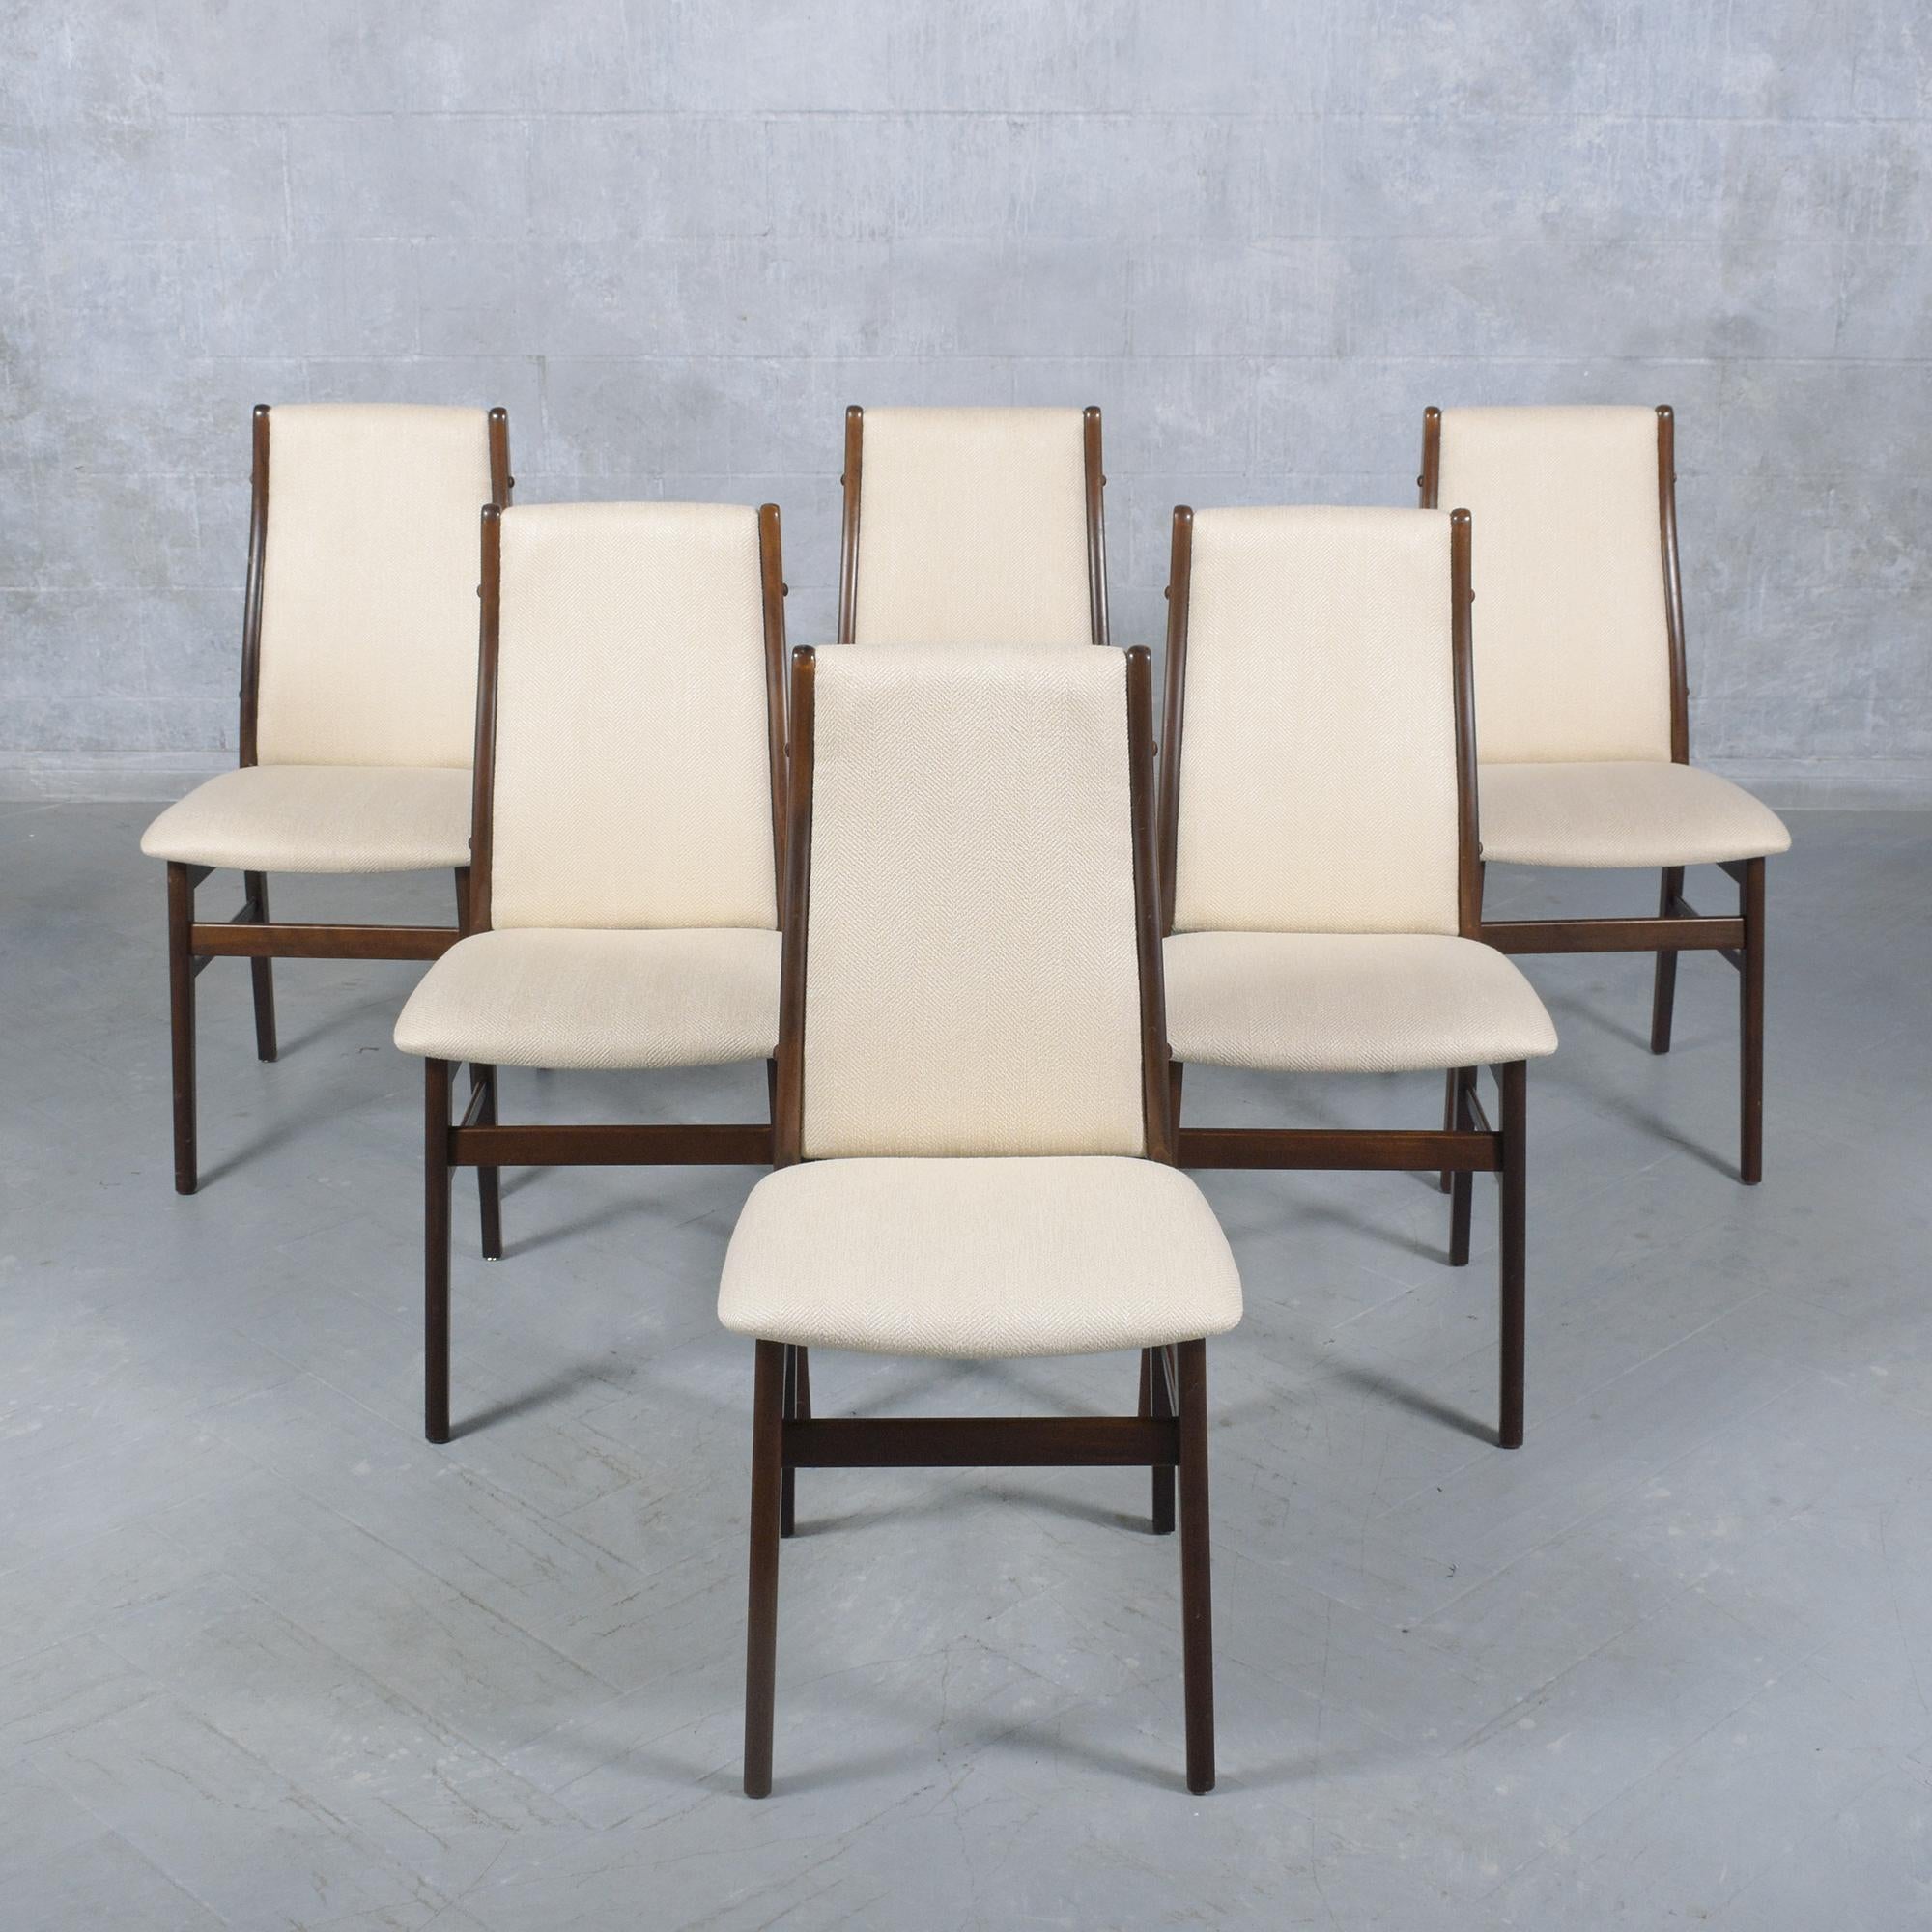 Experience the sophistication of Danish design with our set of six extraordinary dining room chairs, masterfully crafted from teak wood. This set has been completely restored, refinished, and reupholstered by our team of professional craftsmen,